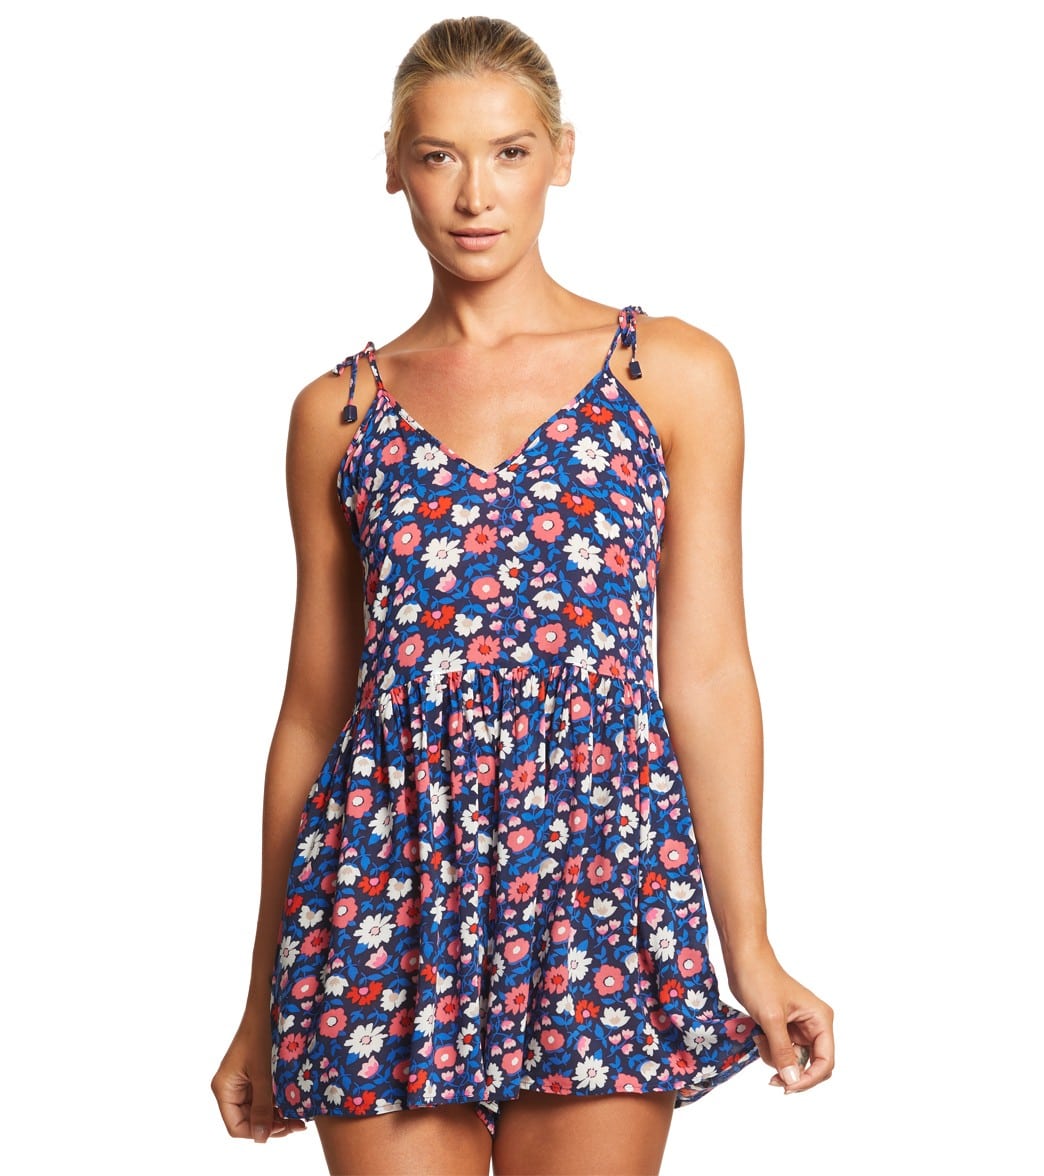 Kate Spade New York Botany Bay Romper Cover Up - French Navy X-Small - Swimoutlet.com